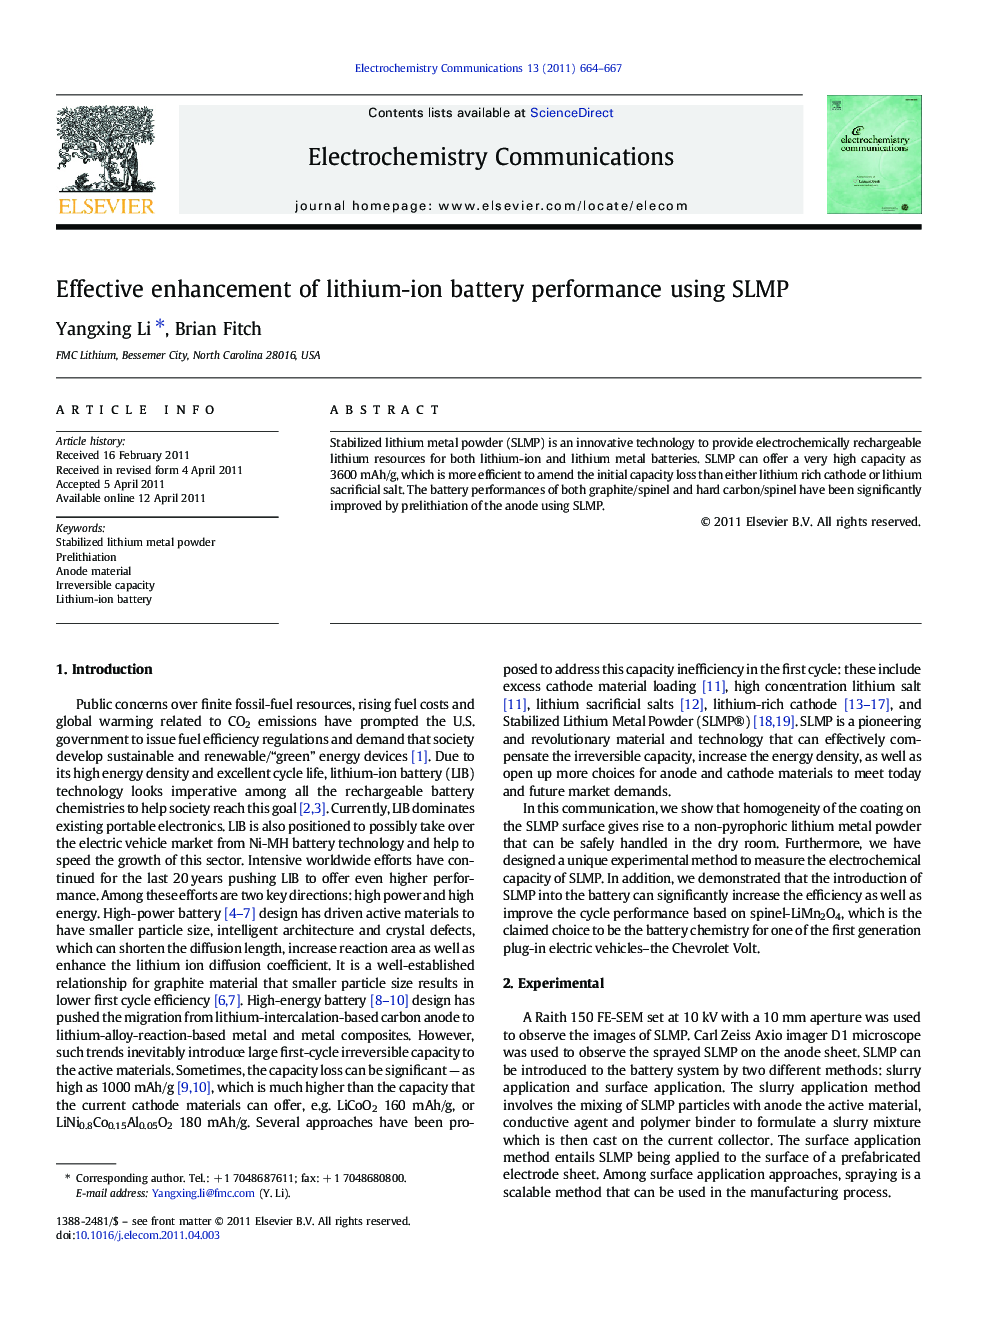 Effective enhancement of lithium-ion battery performance using SLMP